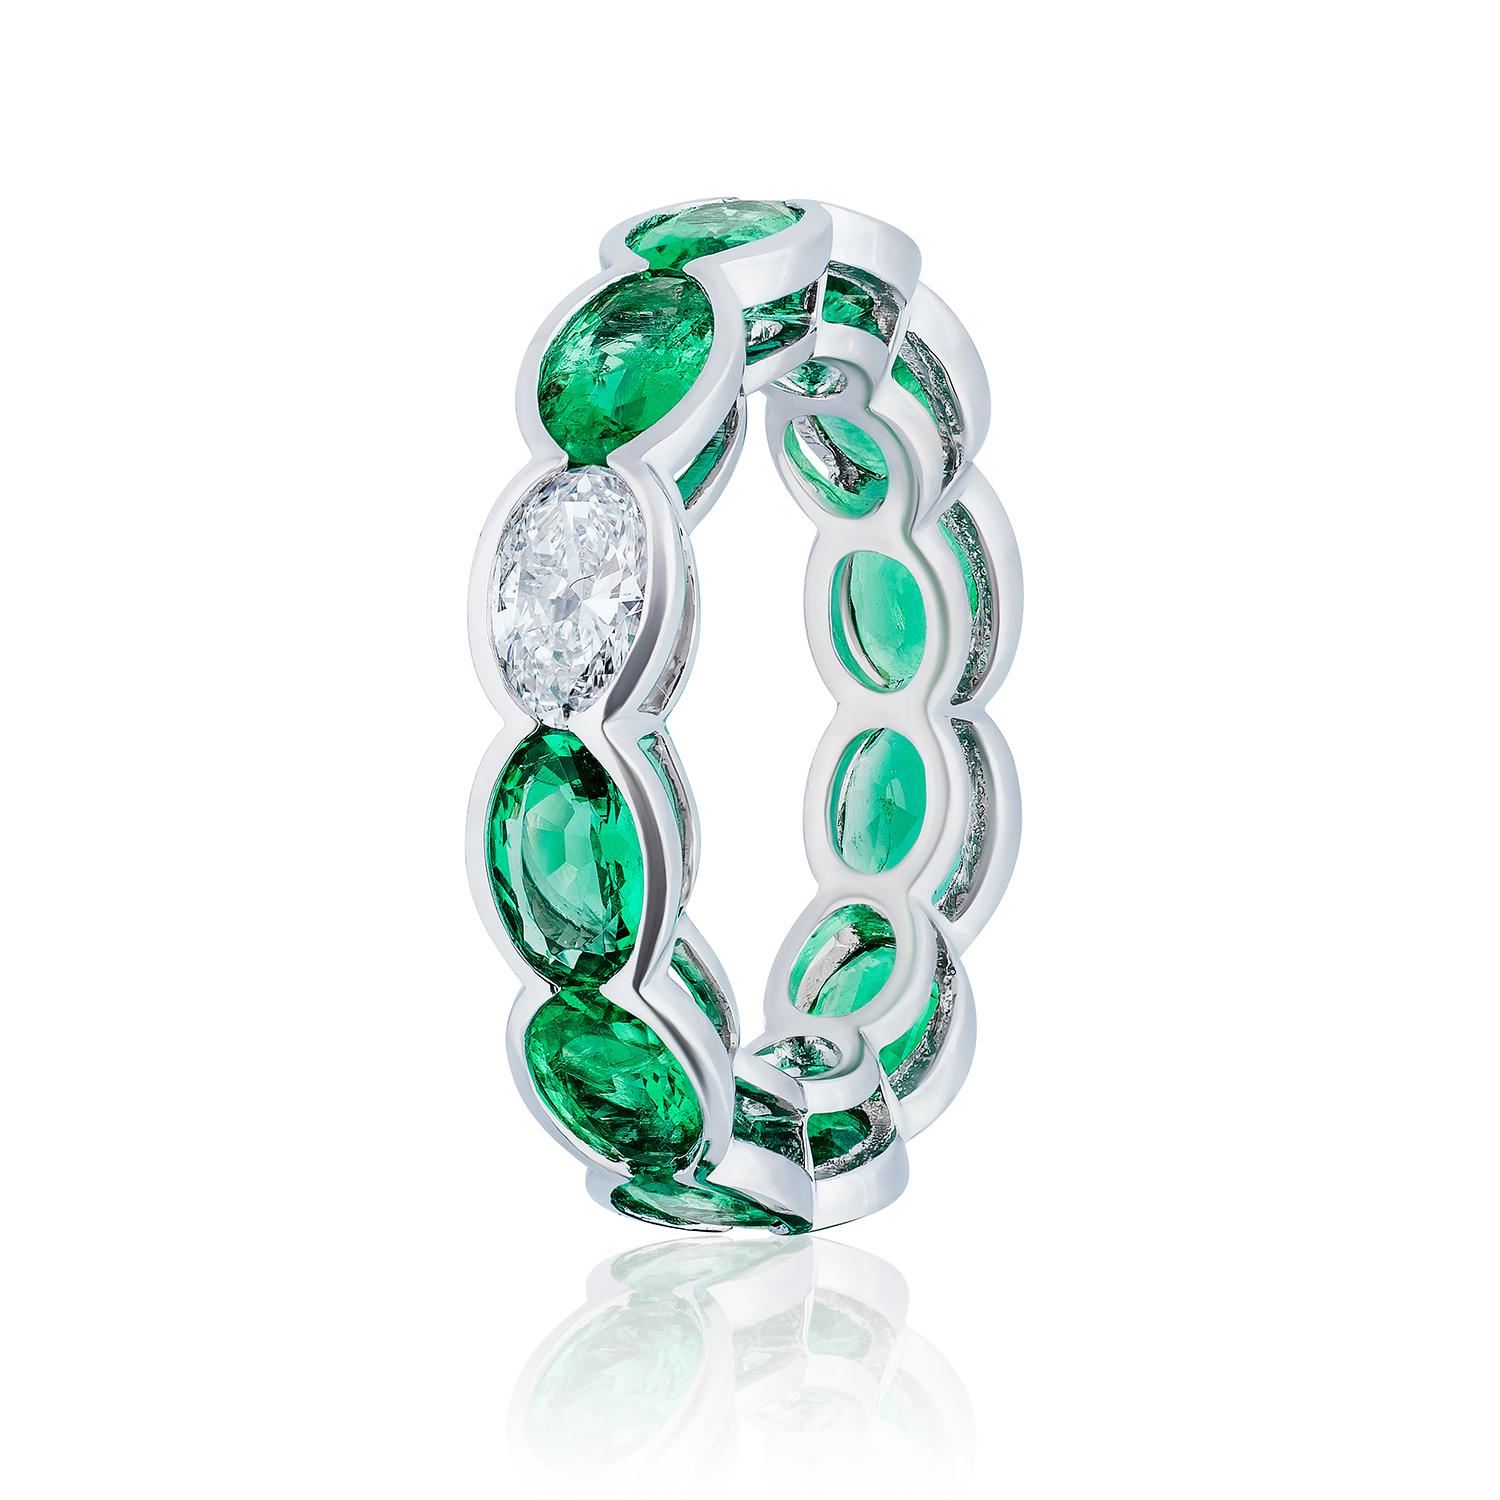 Semi Bezel Set Oval Gemstones

11 Emeralds weighing 4.73 Carats
1 Oval Diamond weighing 0.41 Carats
Set in Platinum.

Also available in Sapphires and Rubies.